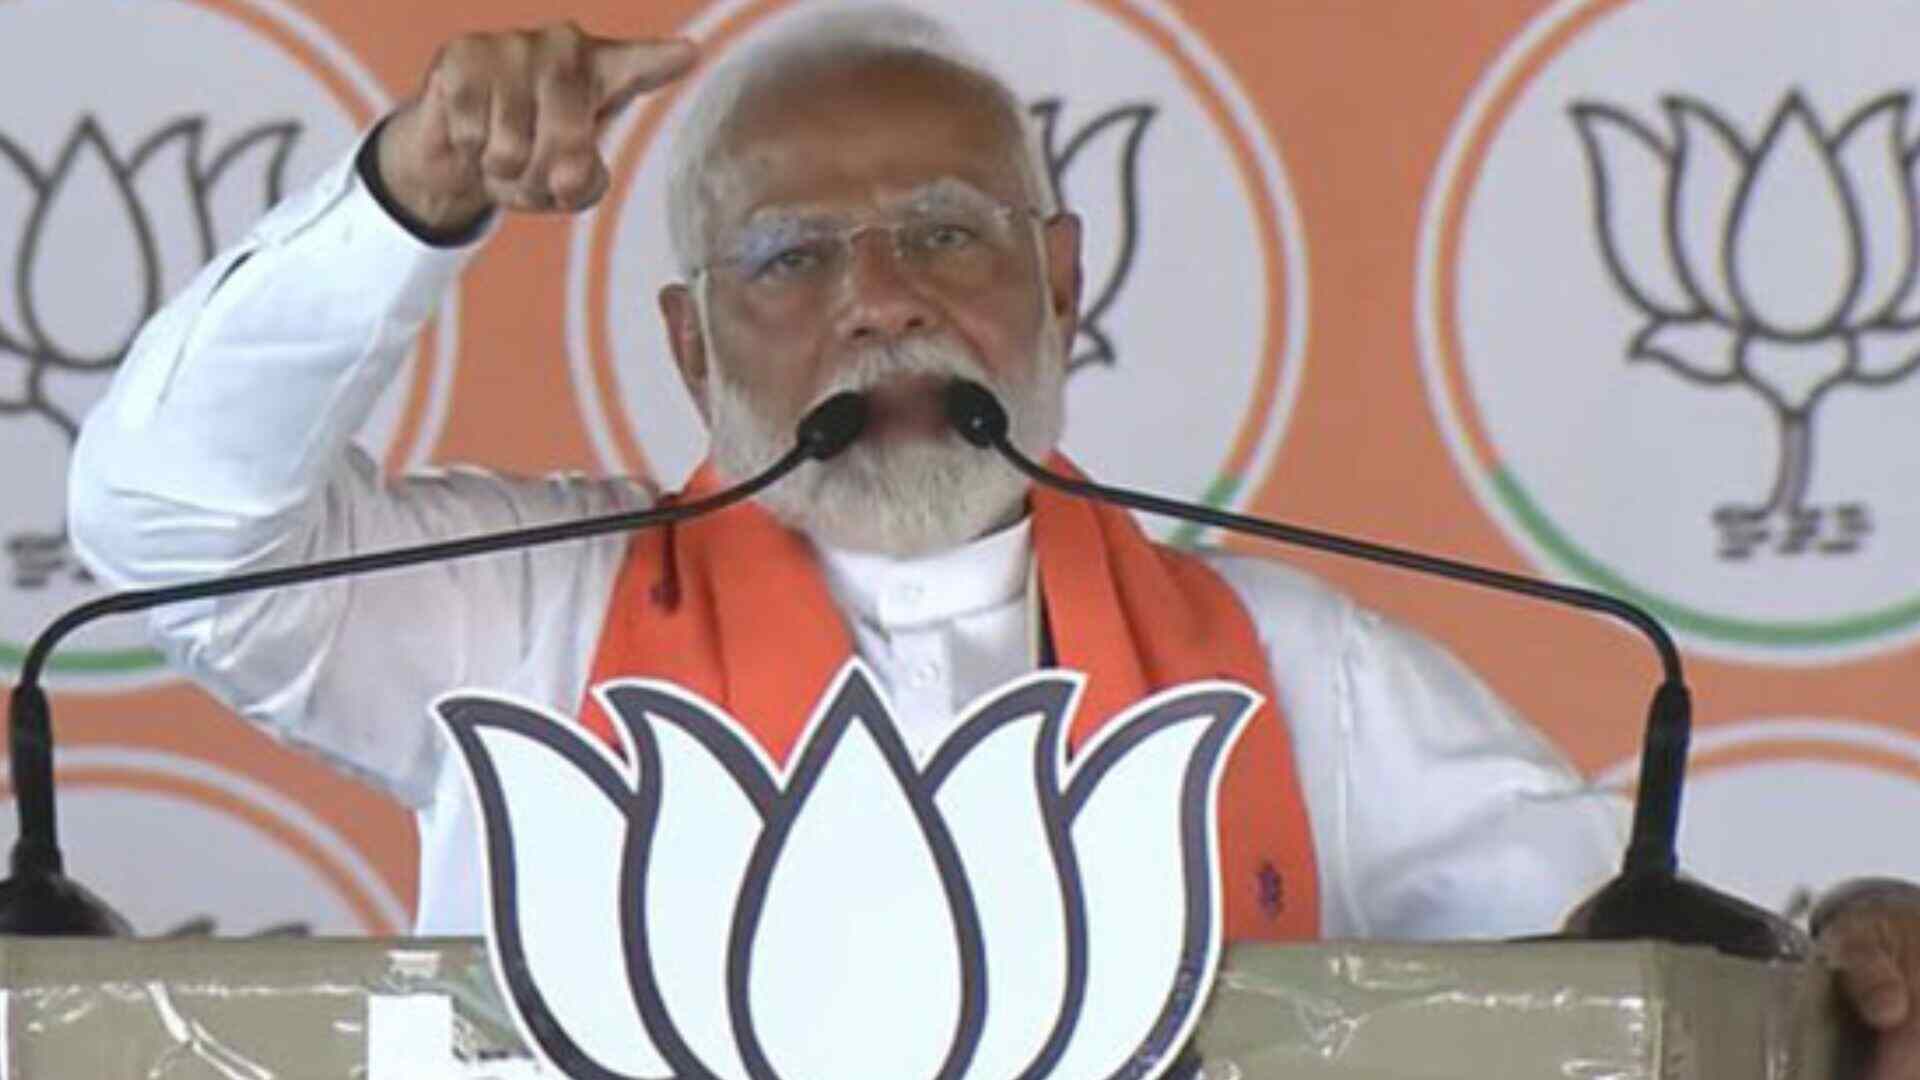 PM Modi’s Election Campaign: 180 Rallies and Roadshows Across India’s Political Heartlands